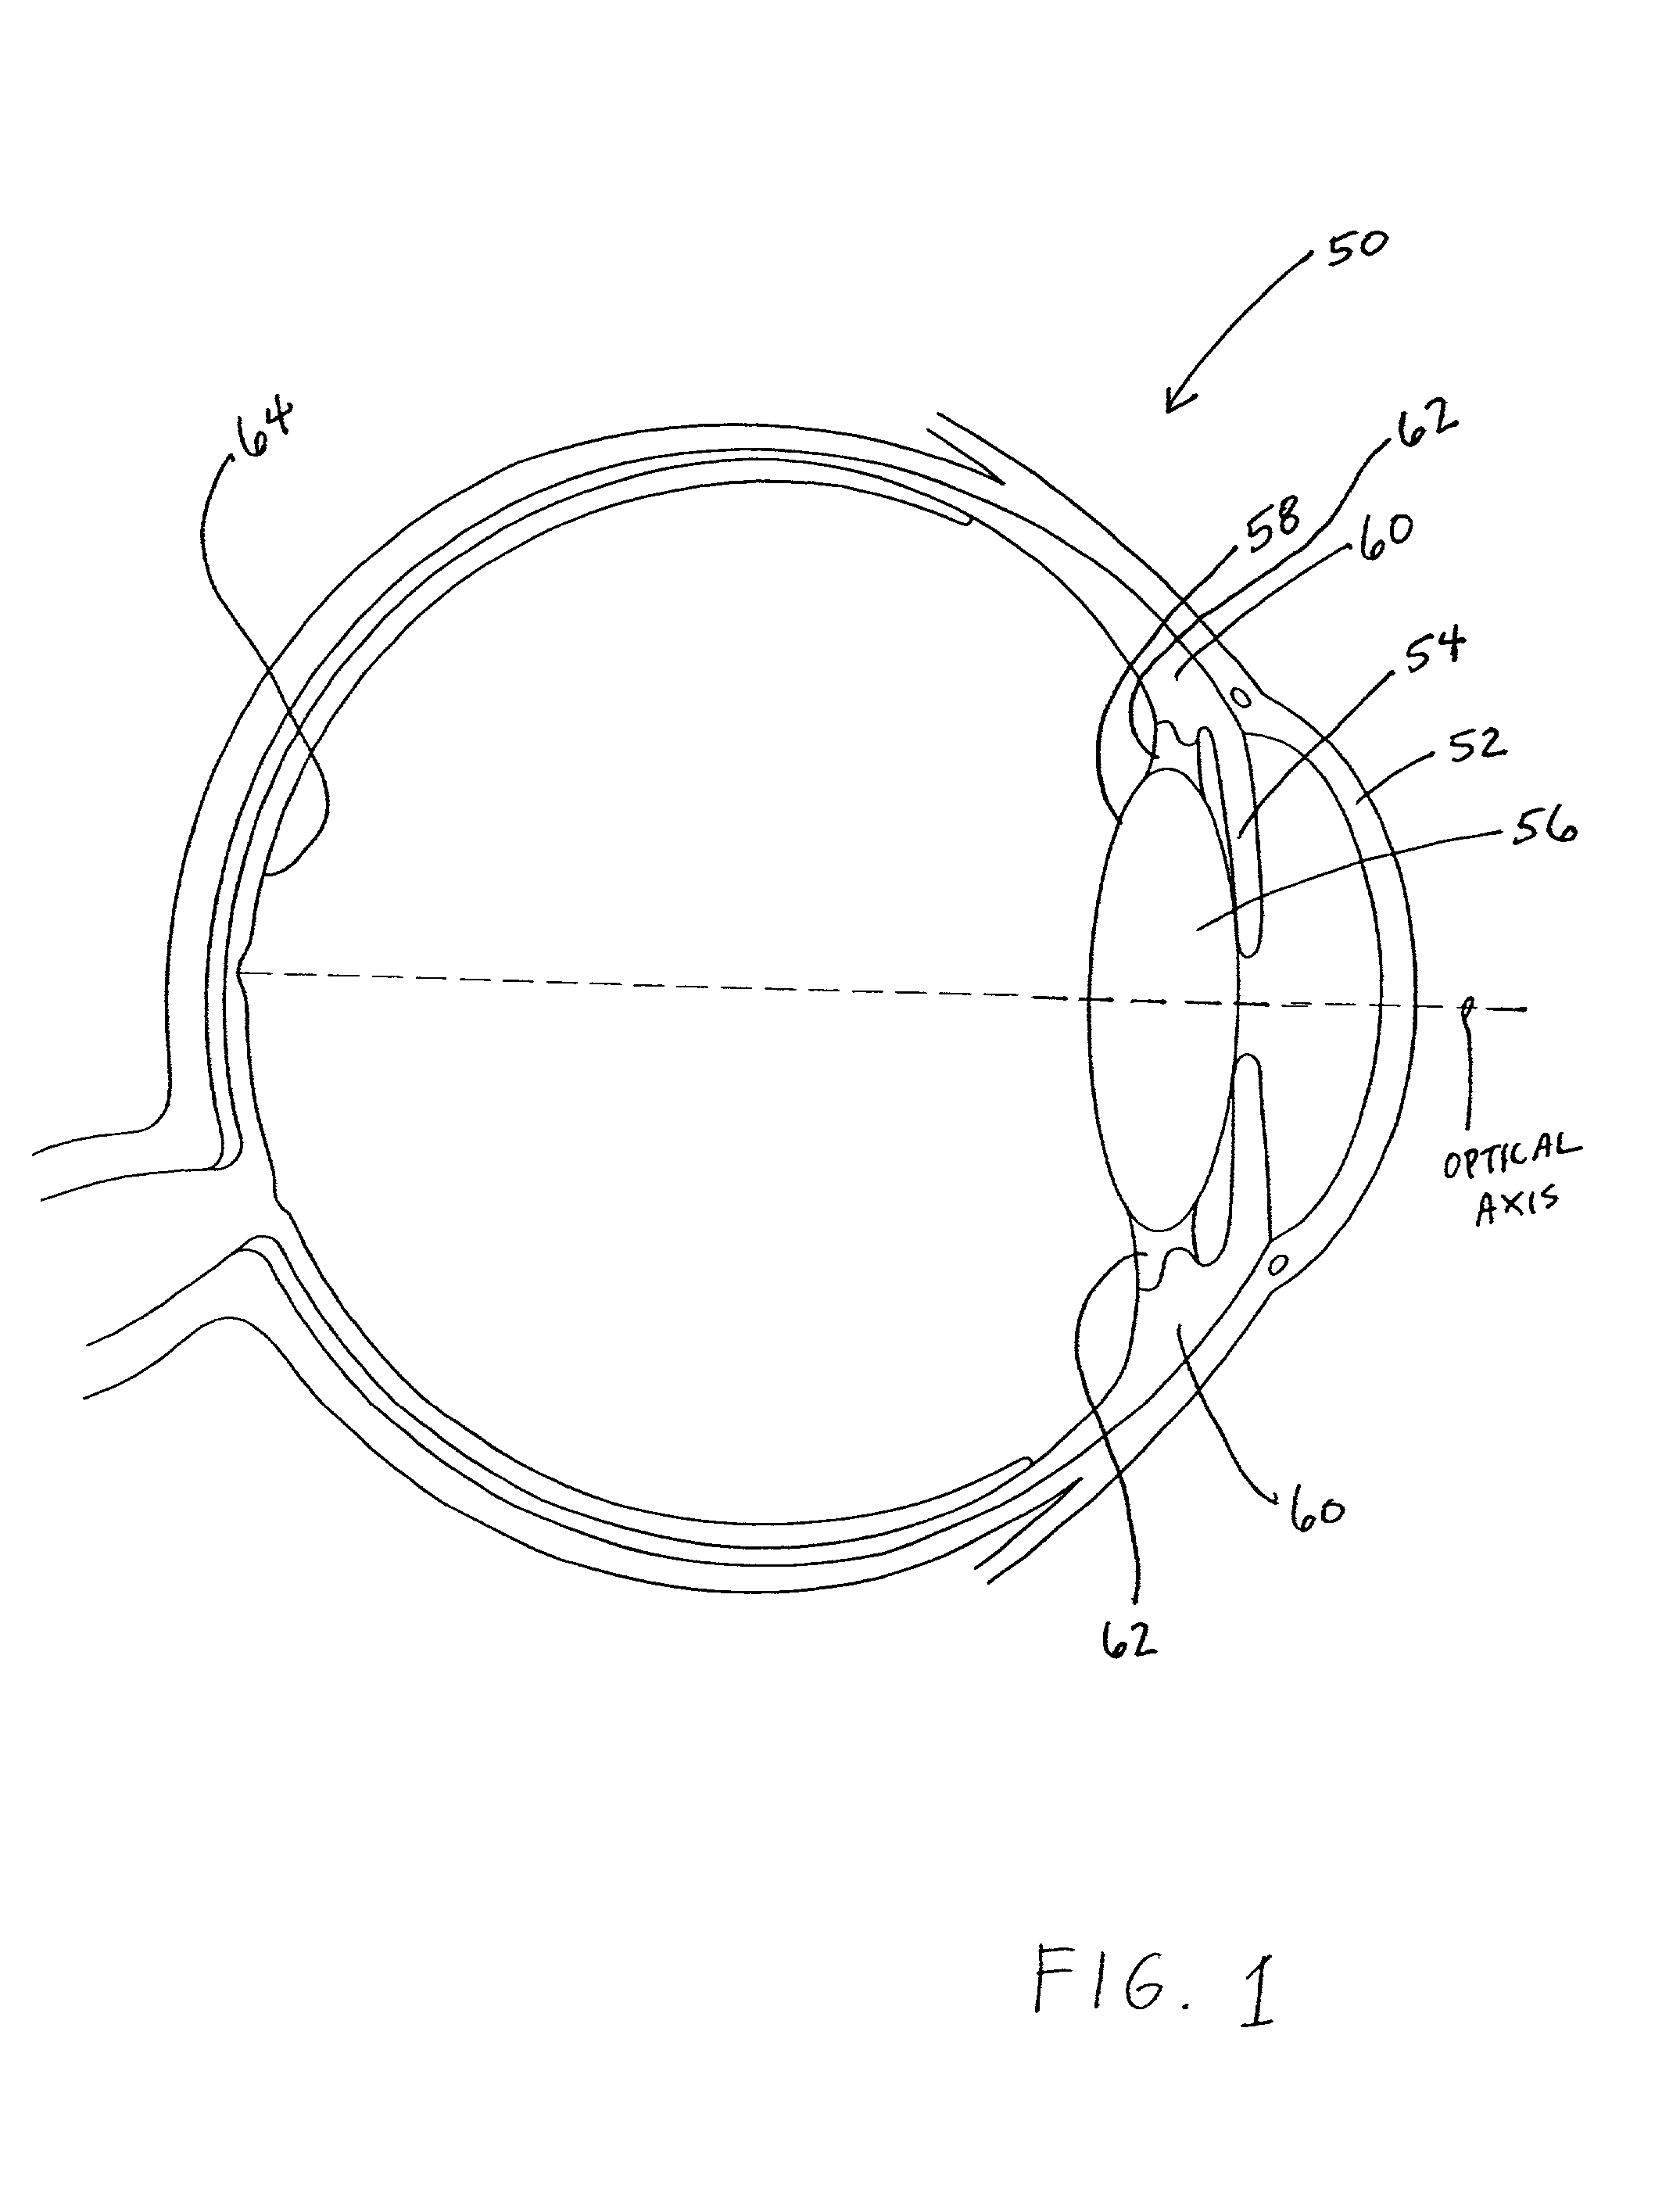 Connection geometry for intraocular lens system